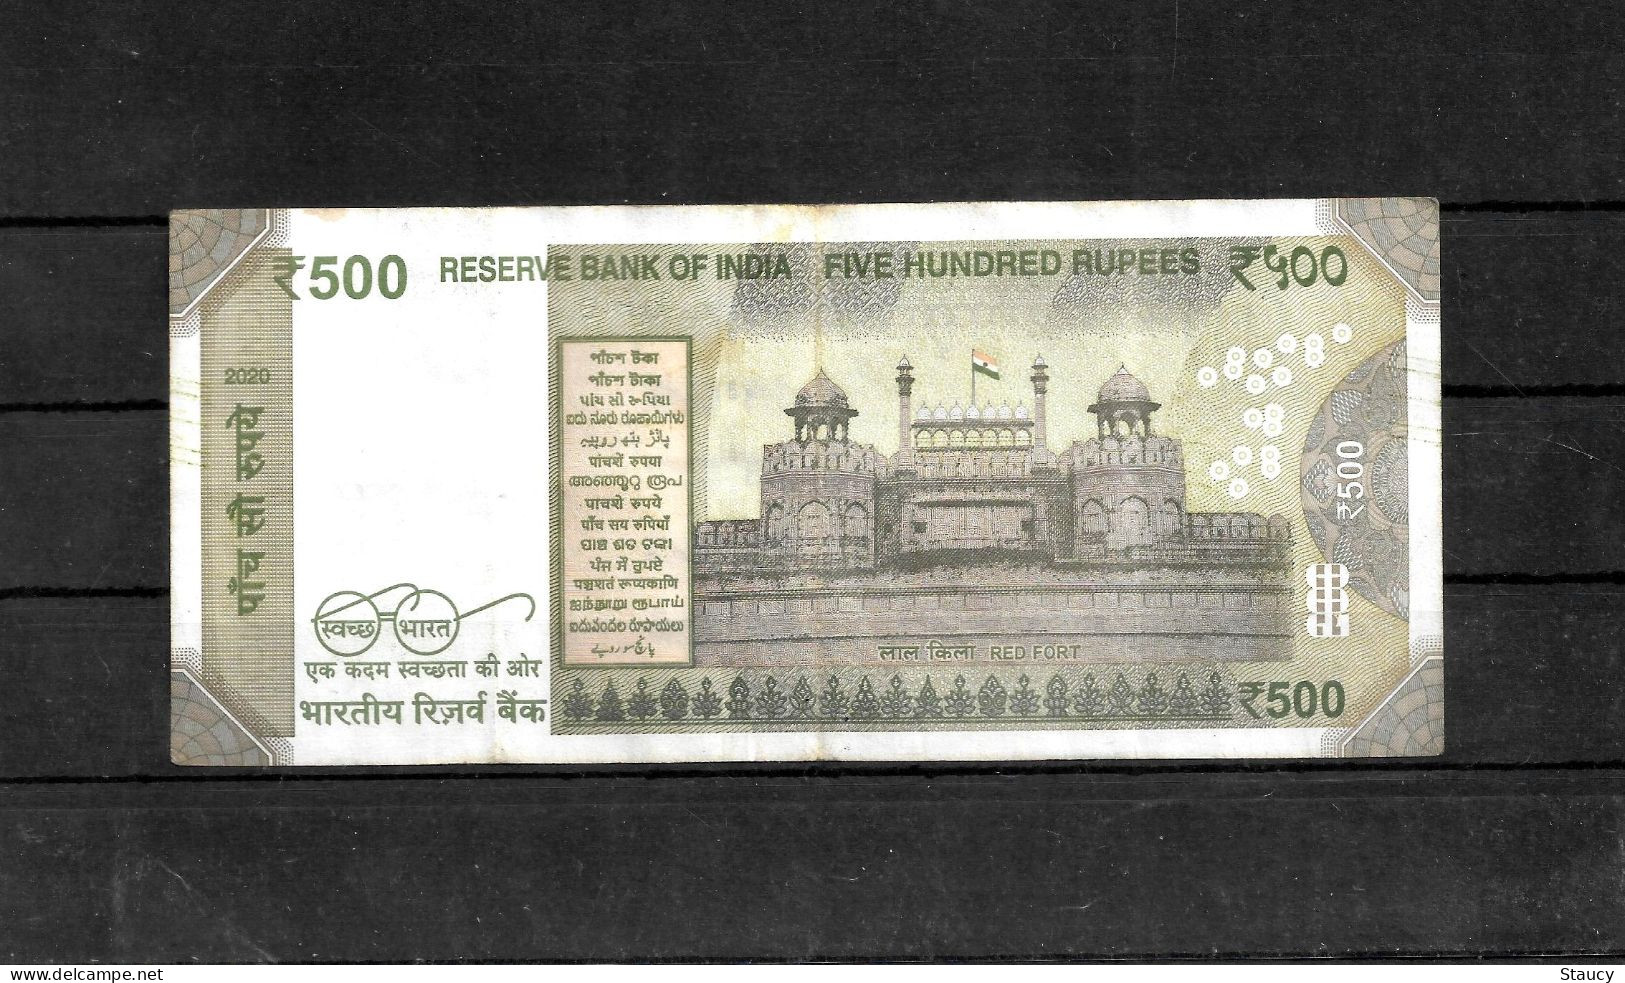 INDIA 2020 Rs. 500.00 Rupees Note Fancy / Holy / Religious Number "786" 731786" USED 100% Genuine Guaranteed As Per Scan - Sonstige – Asien